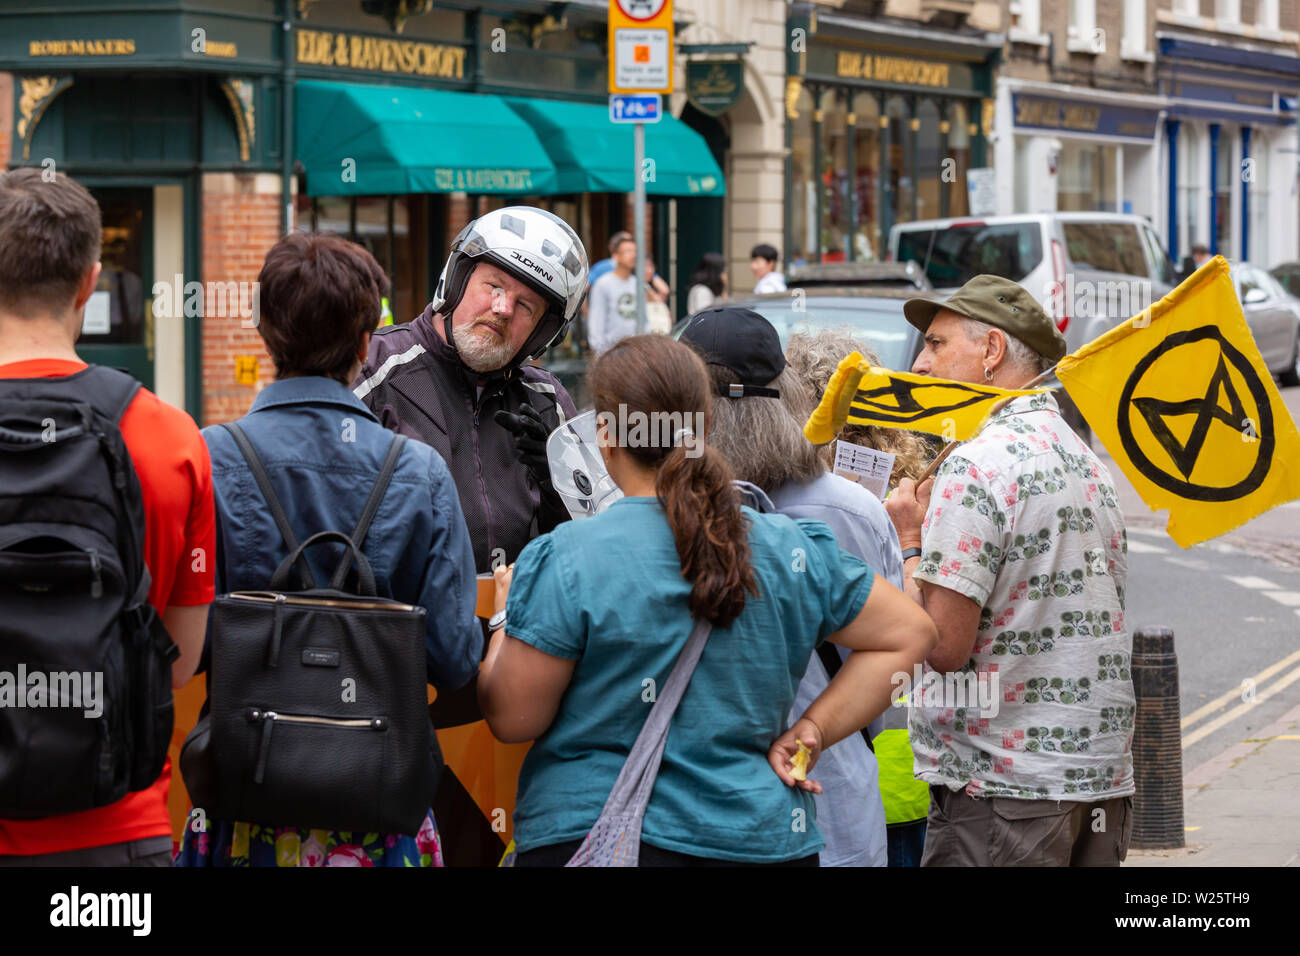 Cambridge, UK. 6th July 2019. Extinction Rebellion Cambridge stage ‘Streets for Life’, a non-violent protest for climate change in Cambridge, UK. ‘Streets for Life’ is closing several roads in central Cambridge to vehicle traffic whilst creating community orientated activities. CamNews / Alamy Live News. Stock Photo